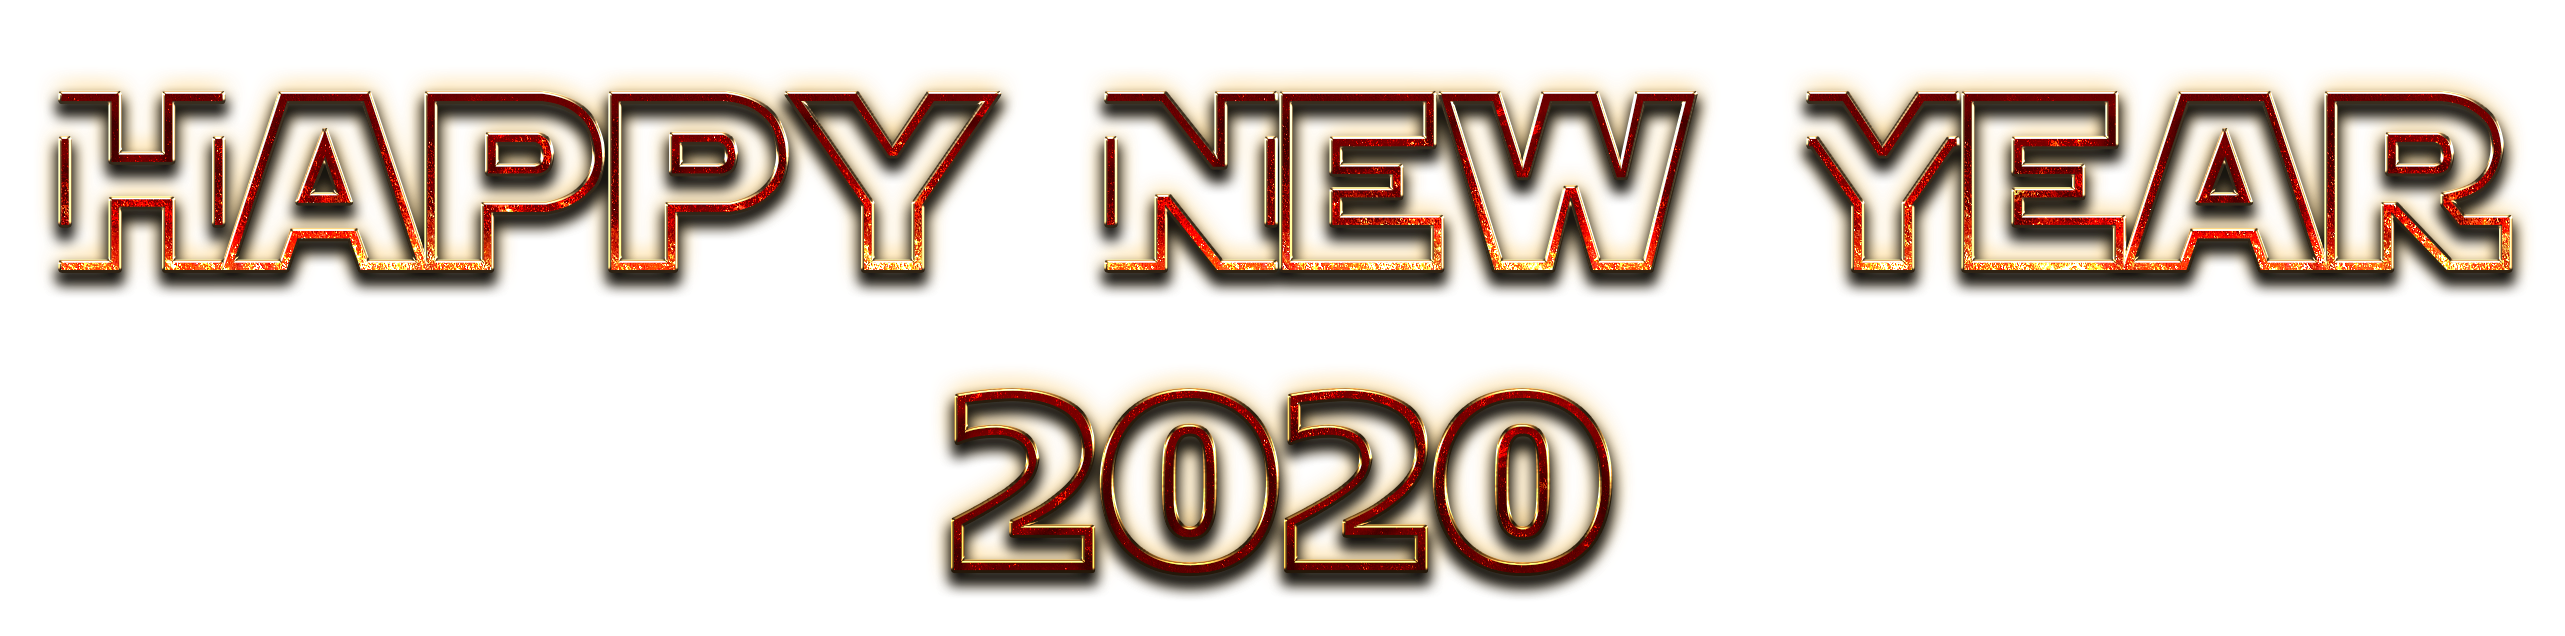 New Year 2020 Transparent Background